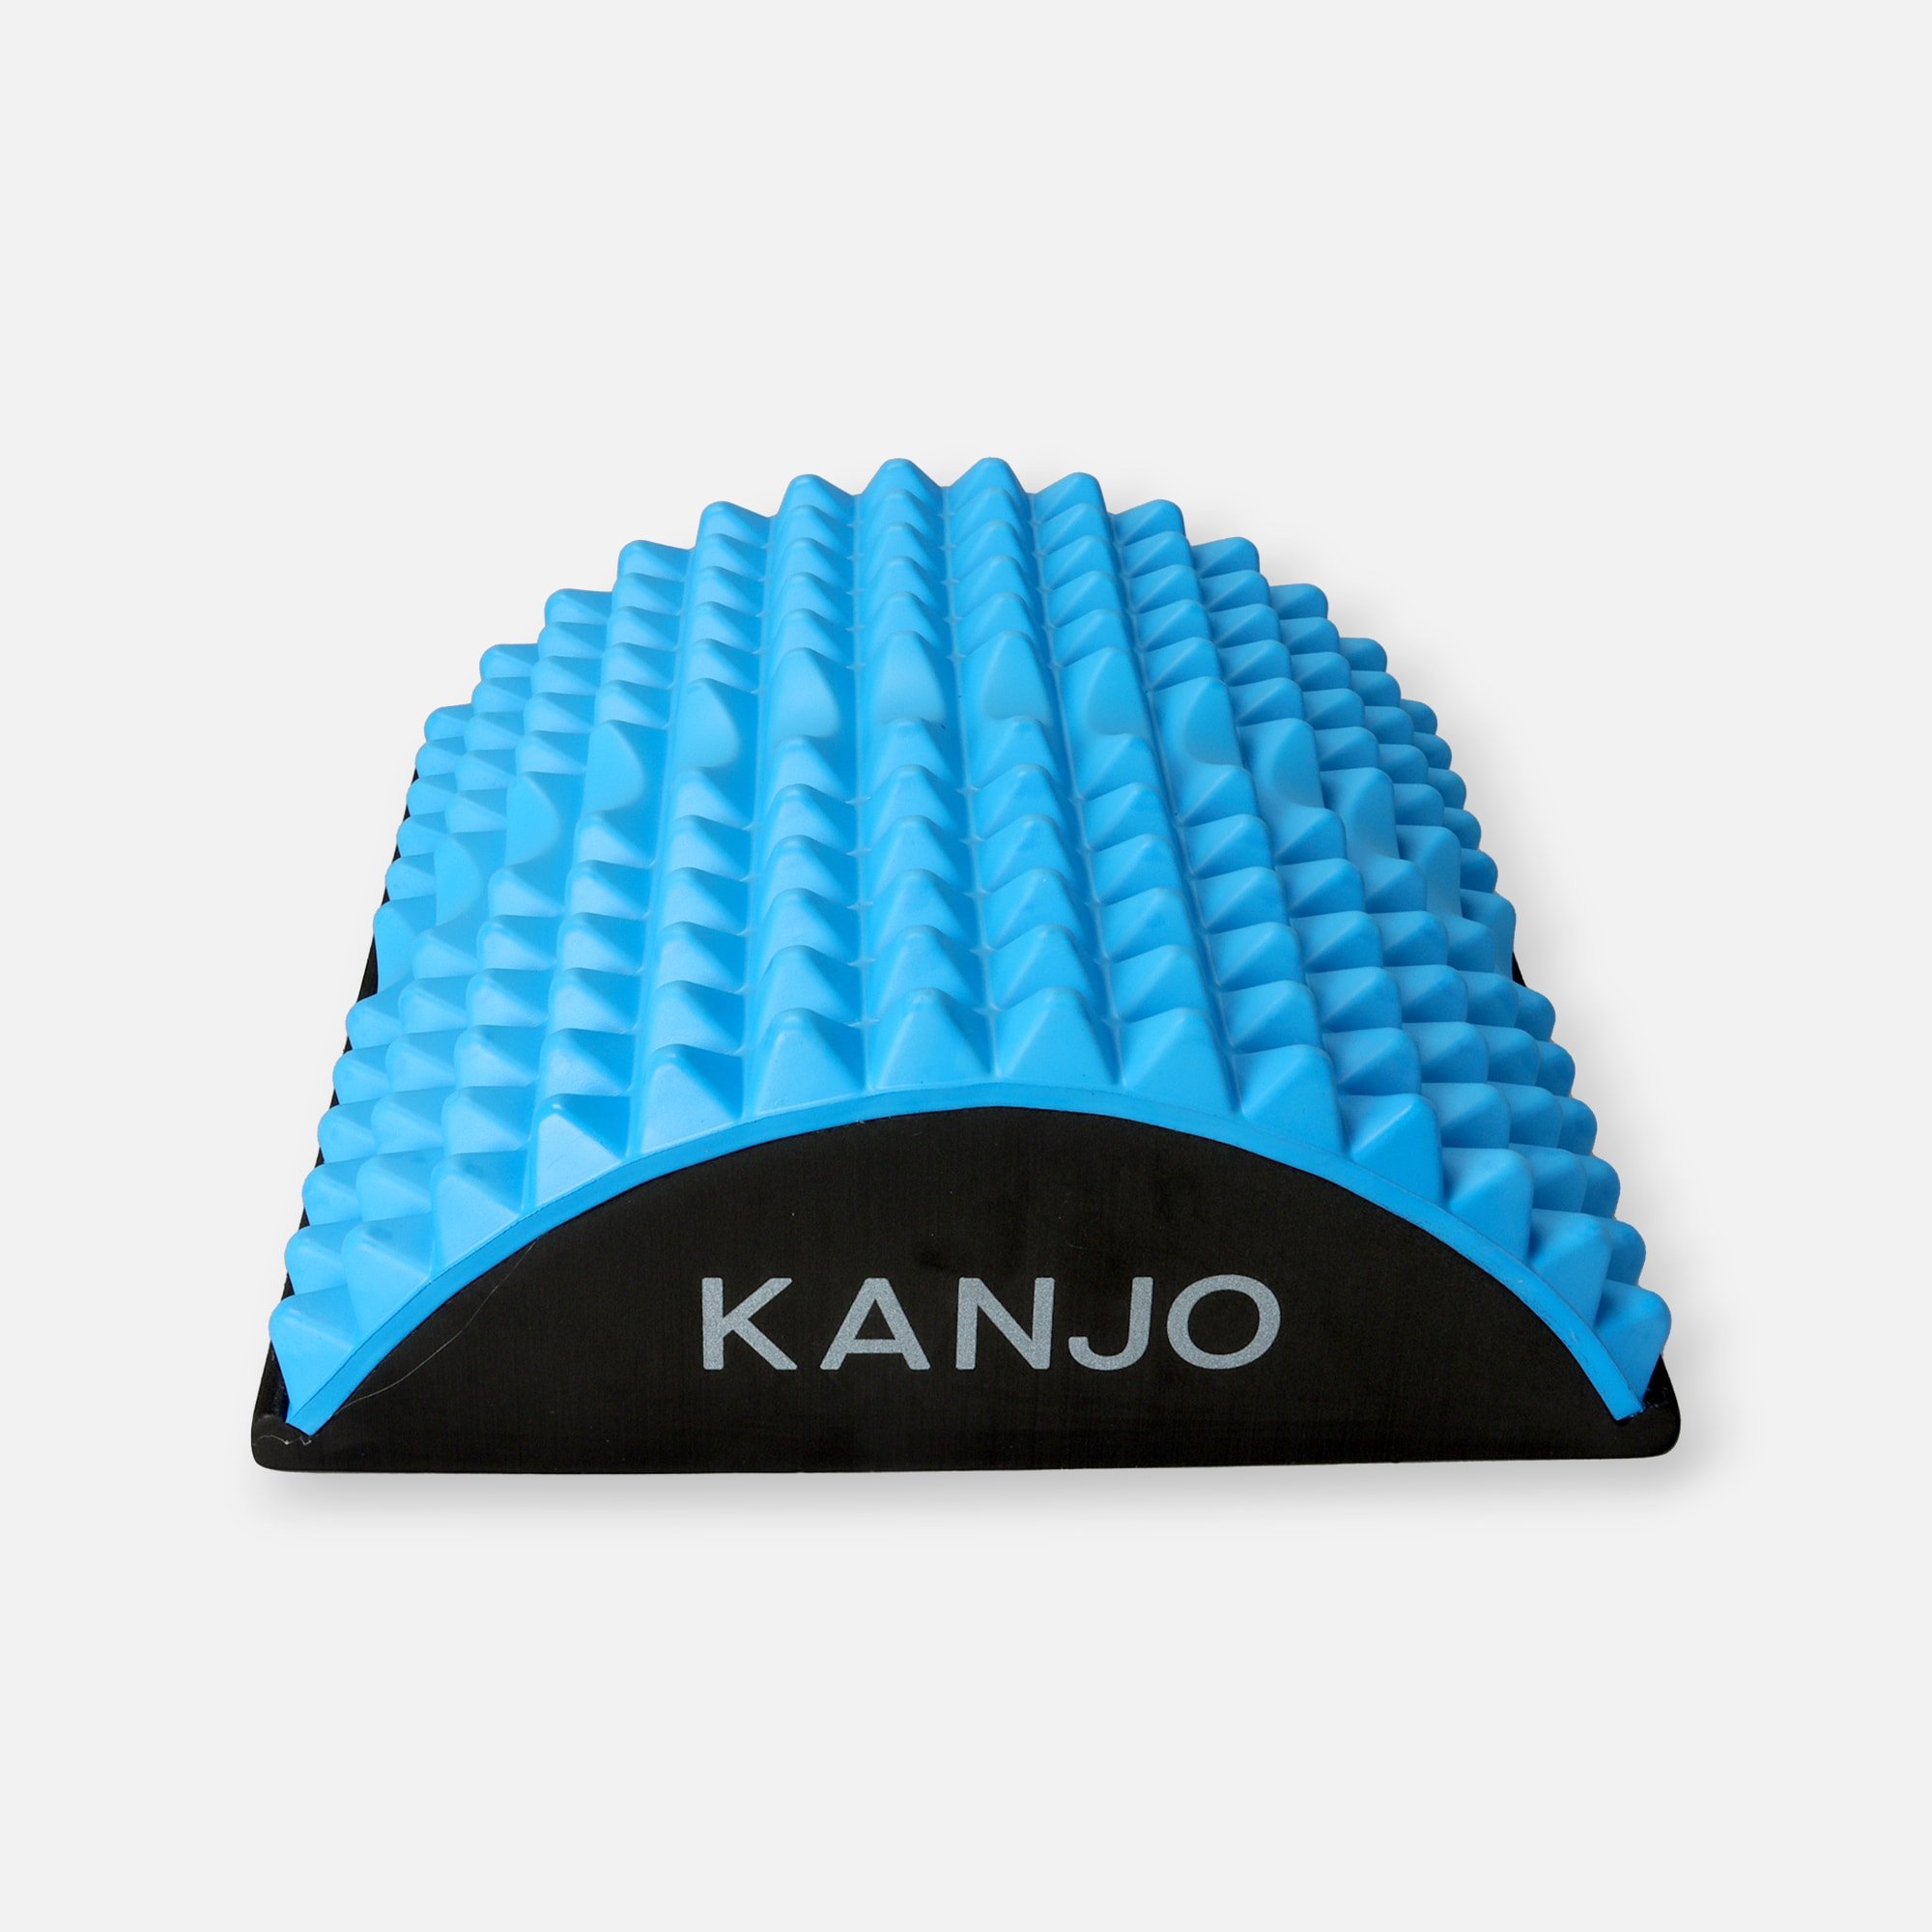 Kanjo FSA HSA Eligible Acupressure Back Pain Relief Pillow | Seat Cushion  for Lower Back Lumbar Support & Back Stretcher for Lower Back Pain Relief 